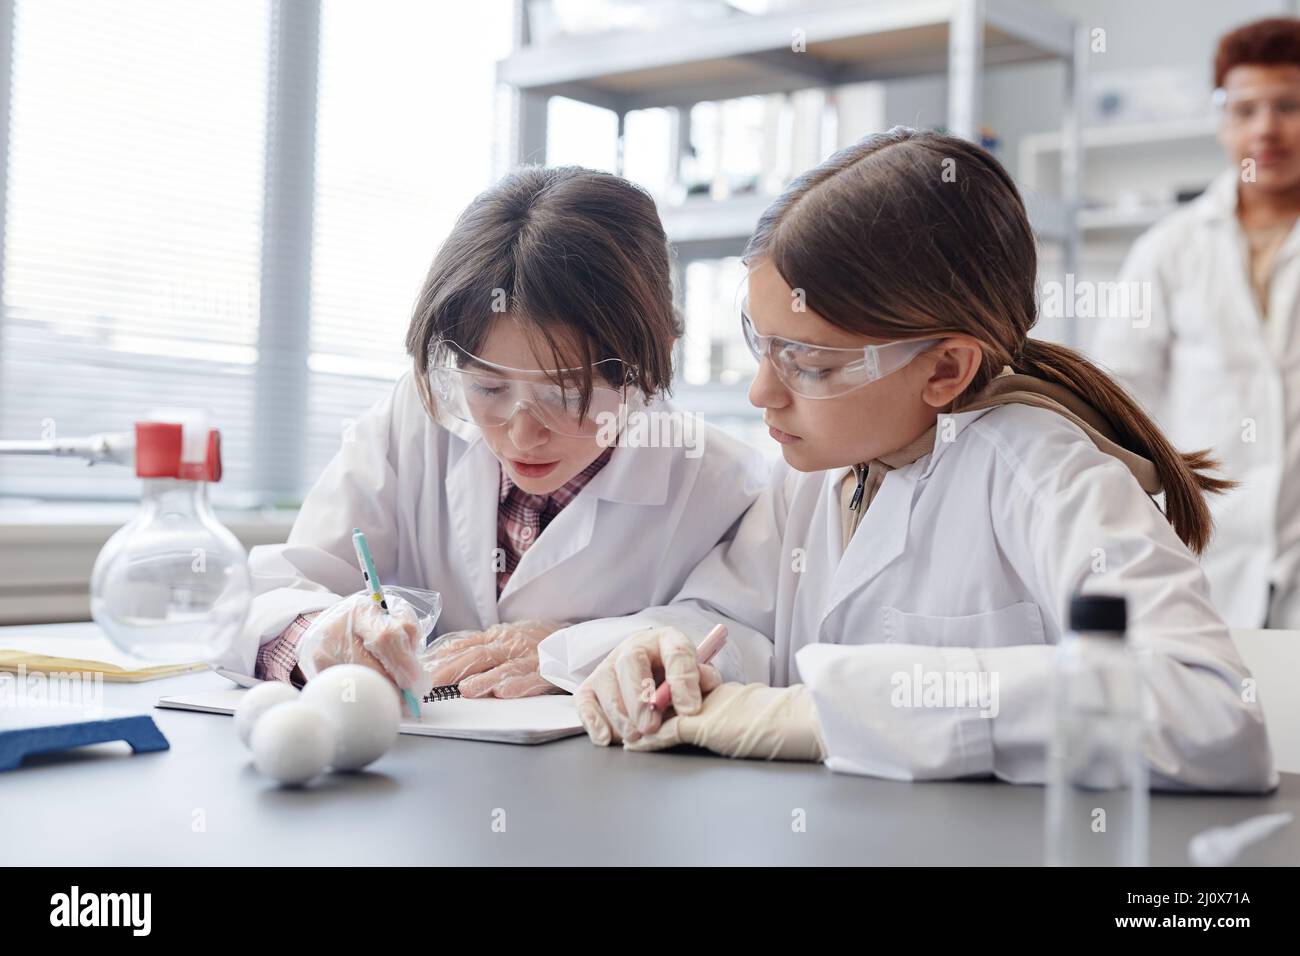 Portrait of two girls taking notes in notebook while doing science experiment in chemistry lab at school Stock Photo